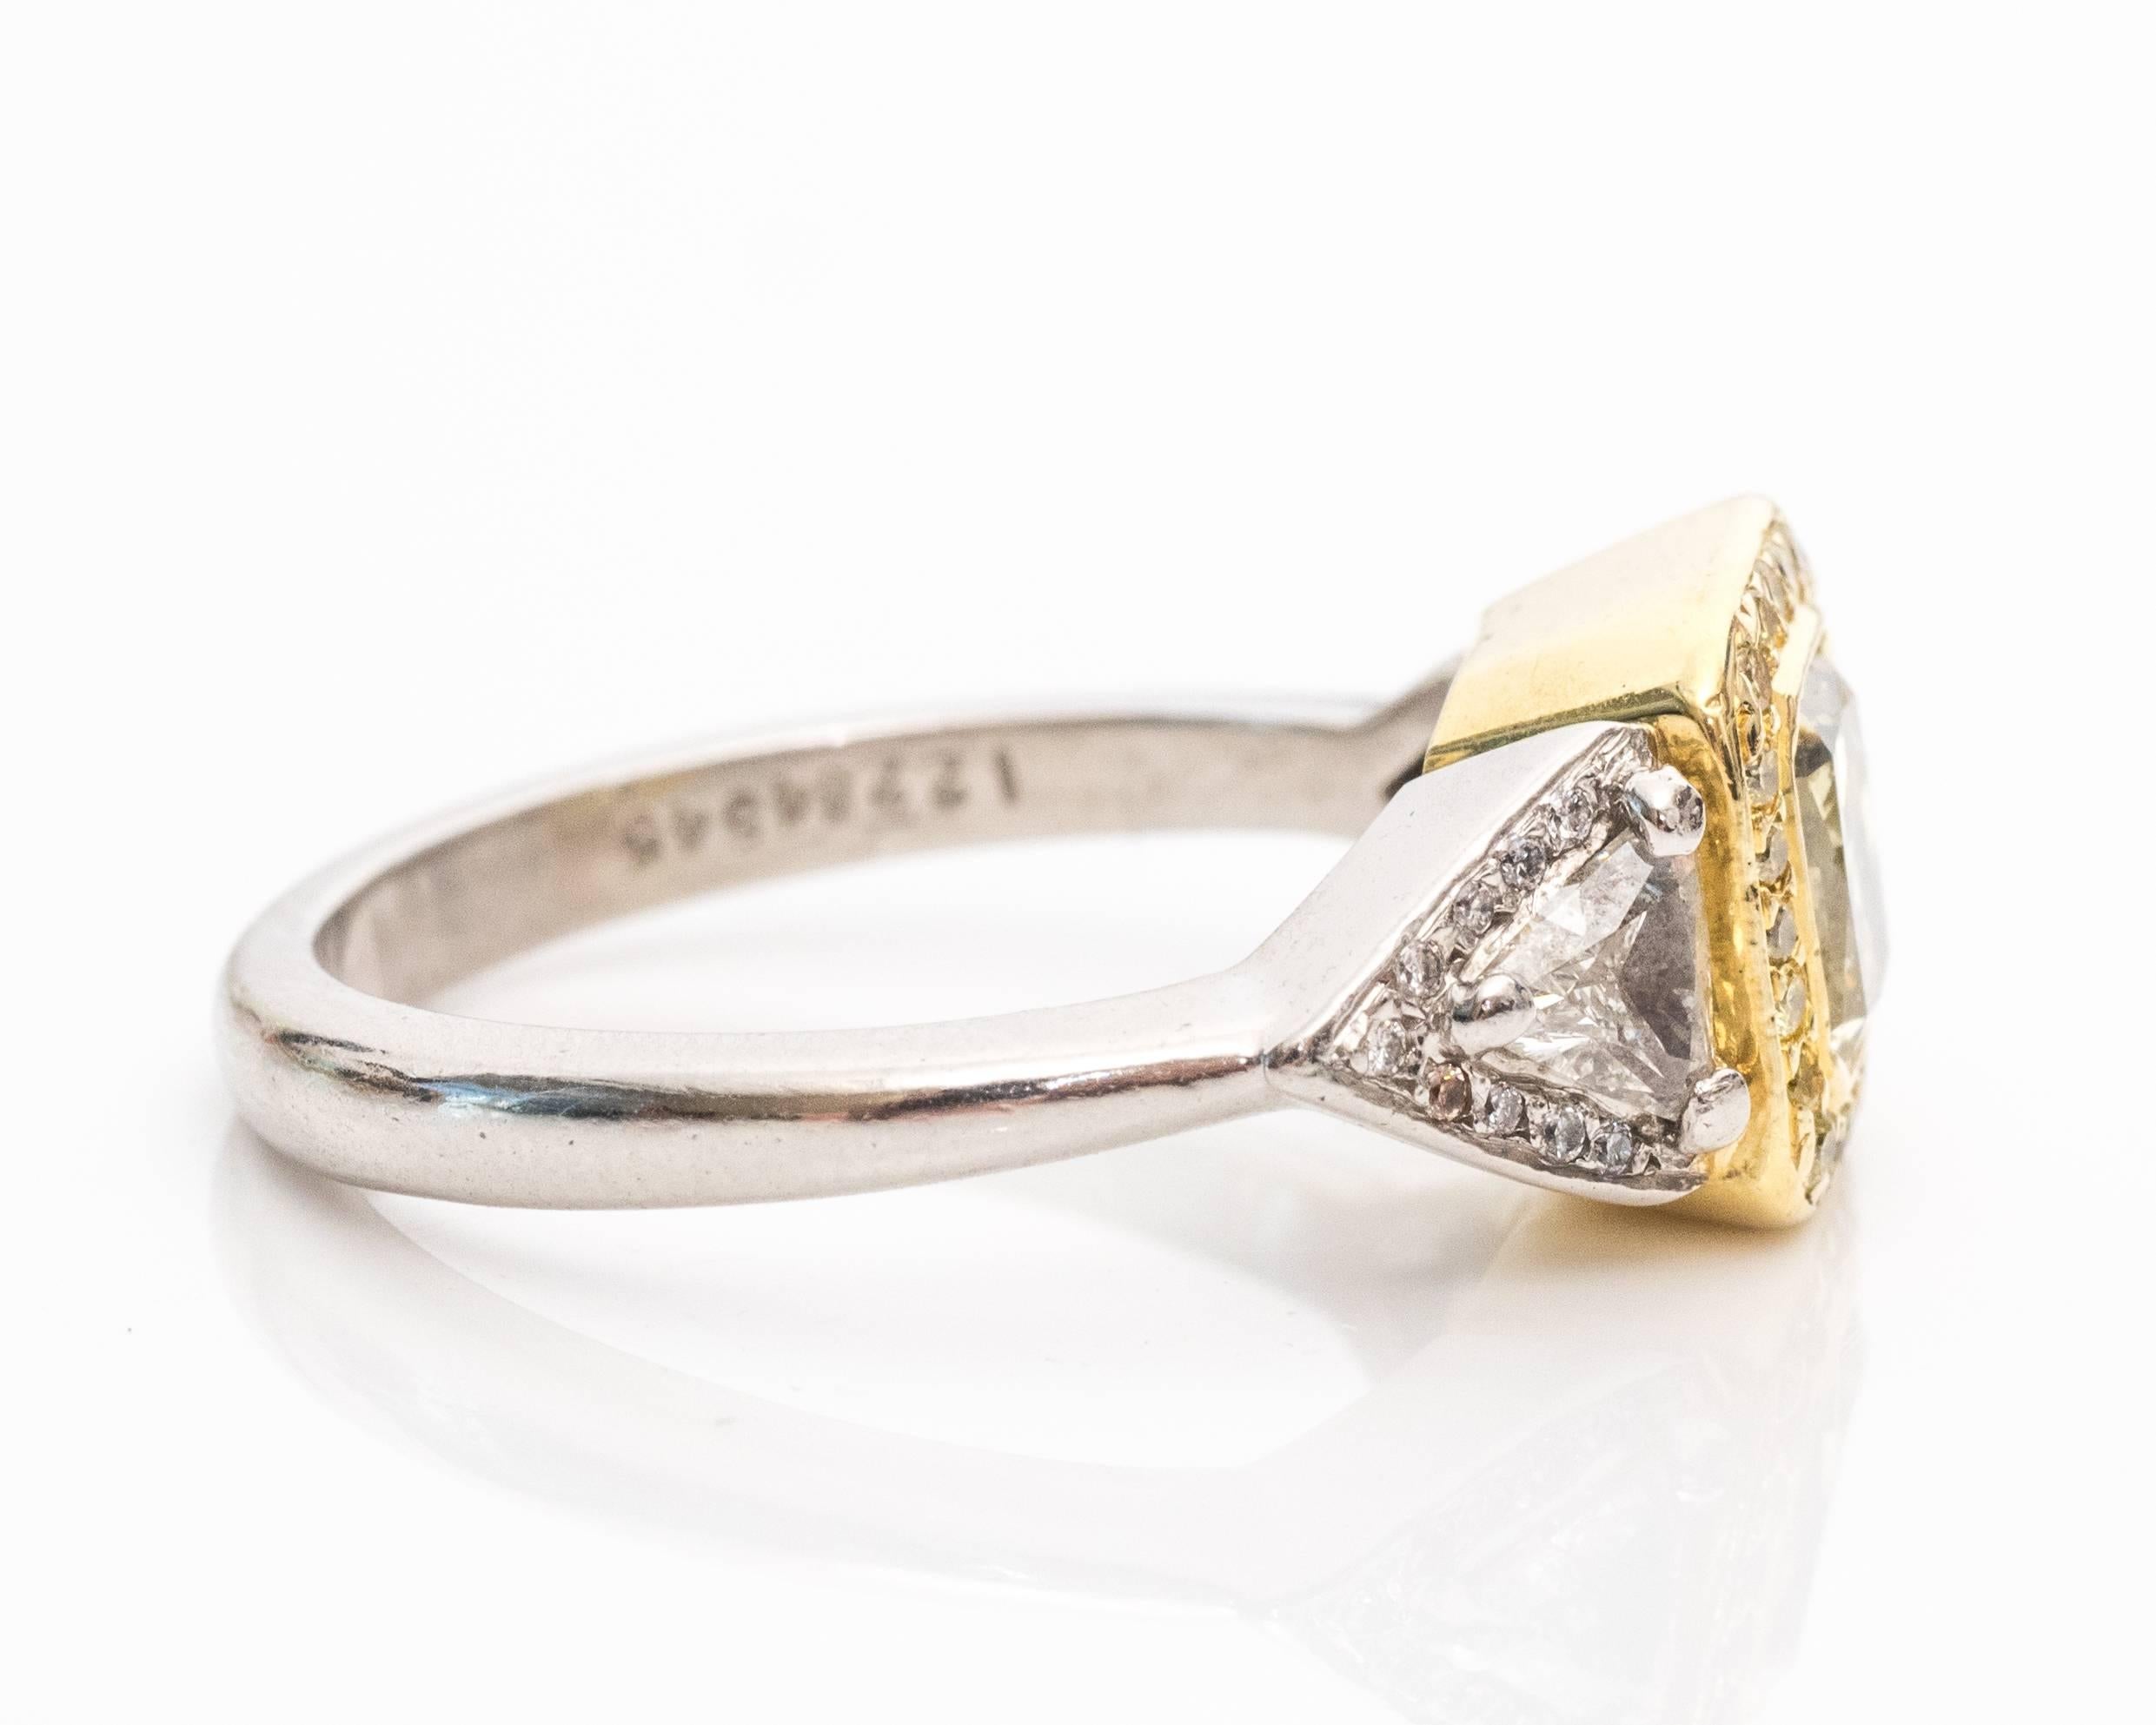 The radiant cut center diamond has official certification from 2005. 
The color is a distinct fancy yellow hue with a halo of small fancy yellow diamonds surrounding the center stone. This area of the stone is mounted in 18 karat yellow gold to